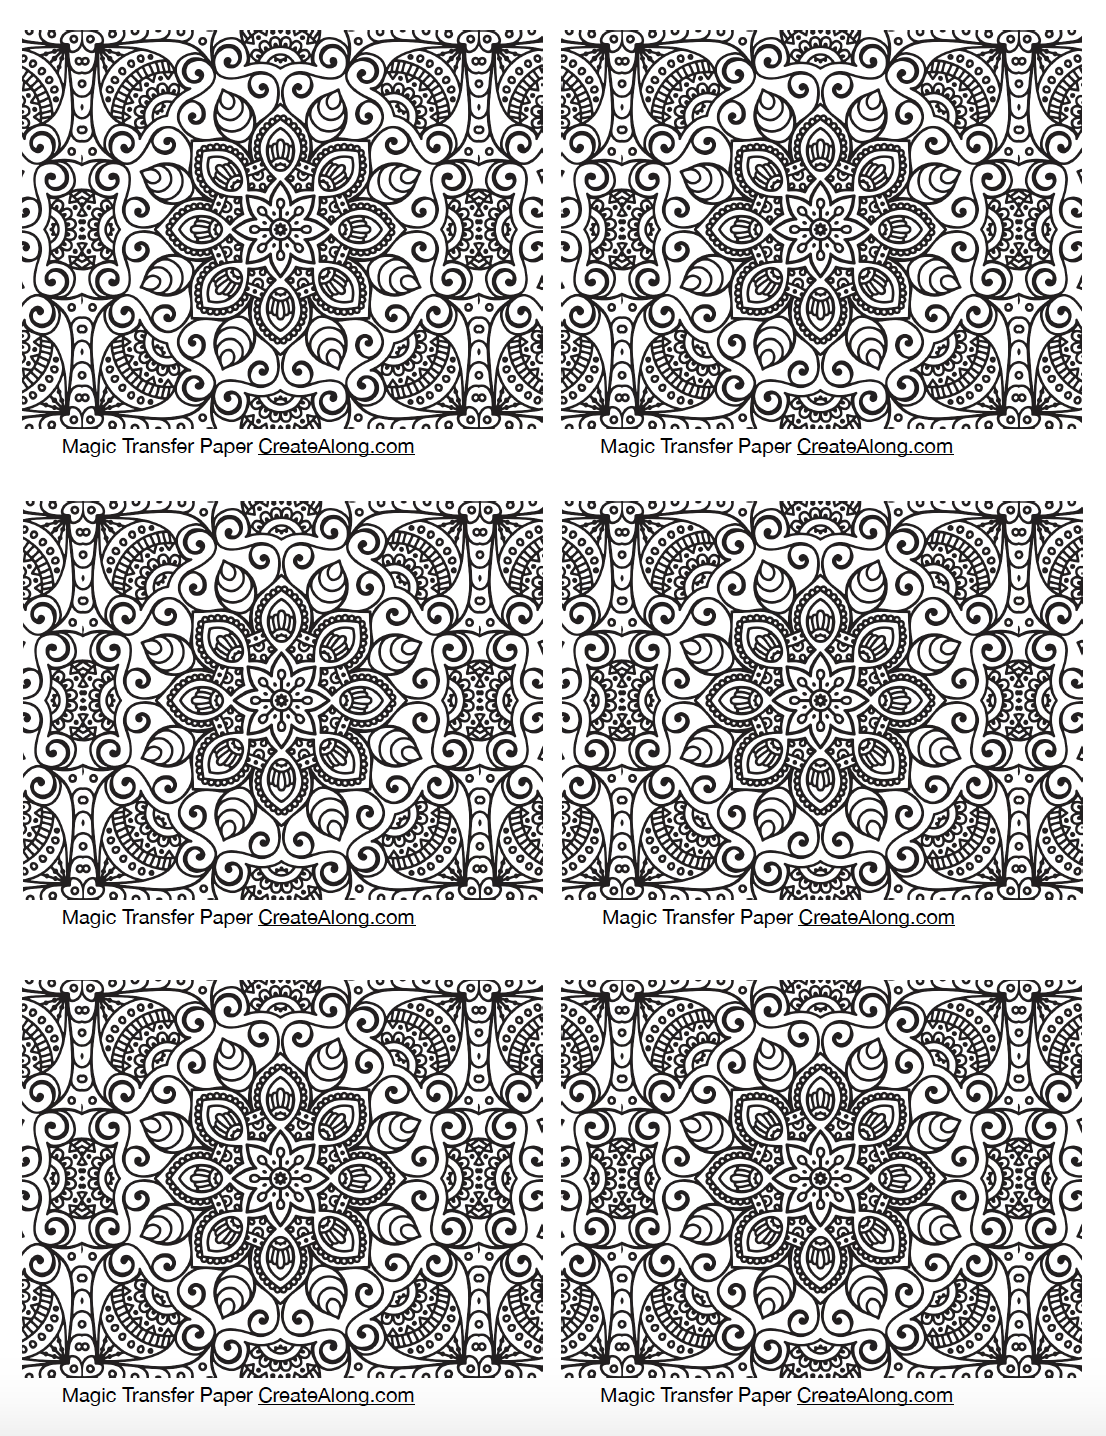 Digital Rectangular Mandala Image Transfer PDF for creating images on raw polymer clay and for use with Magic Transfer Paper